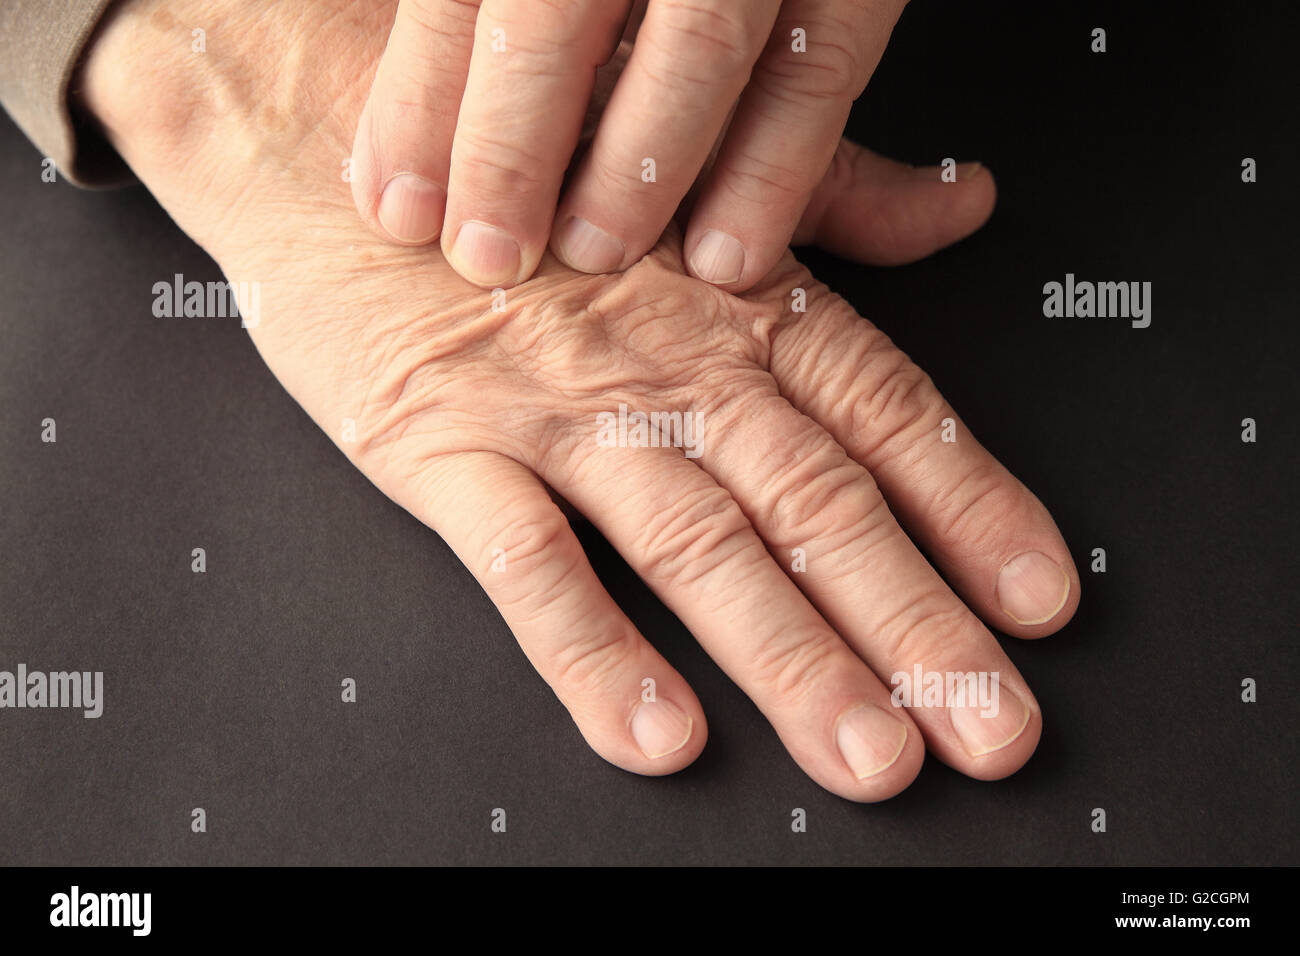 An older man has pain on his hand on a black background. Stock Photo